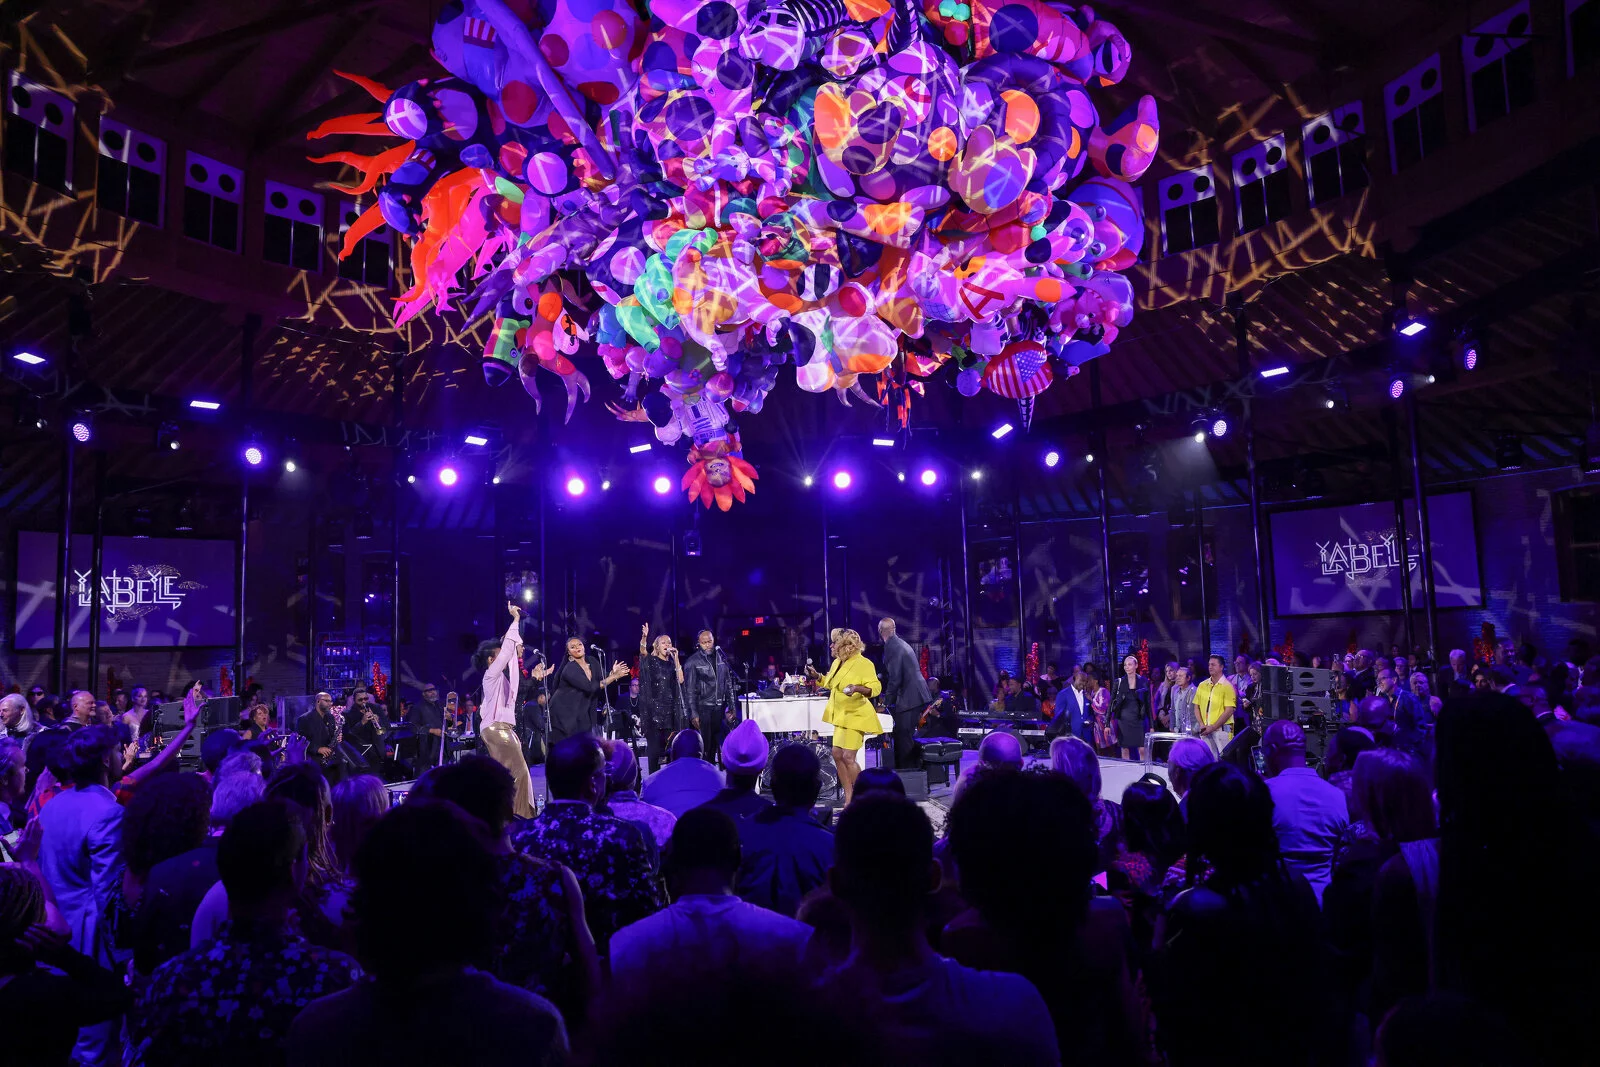 Photo of event with performers onstage with an art installation in purple, red, orange, green, and pink hanging above them.